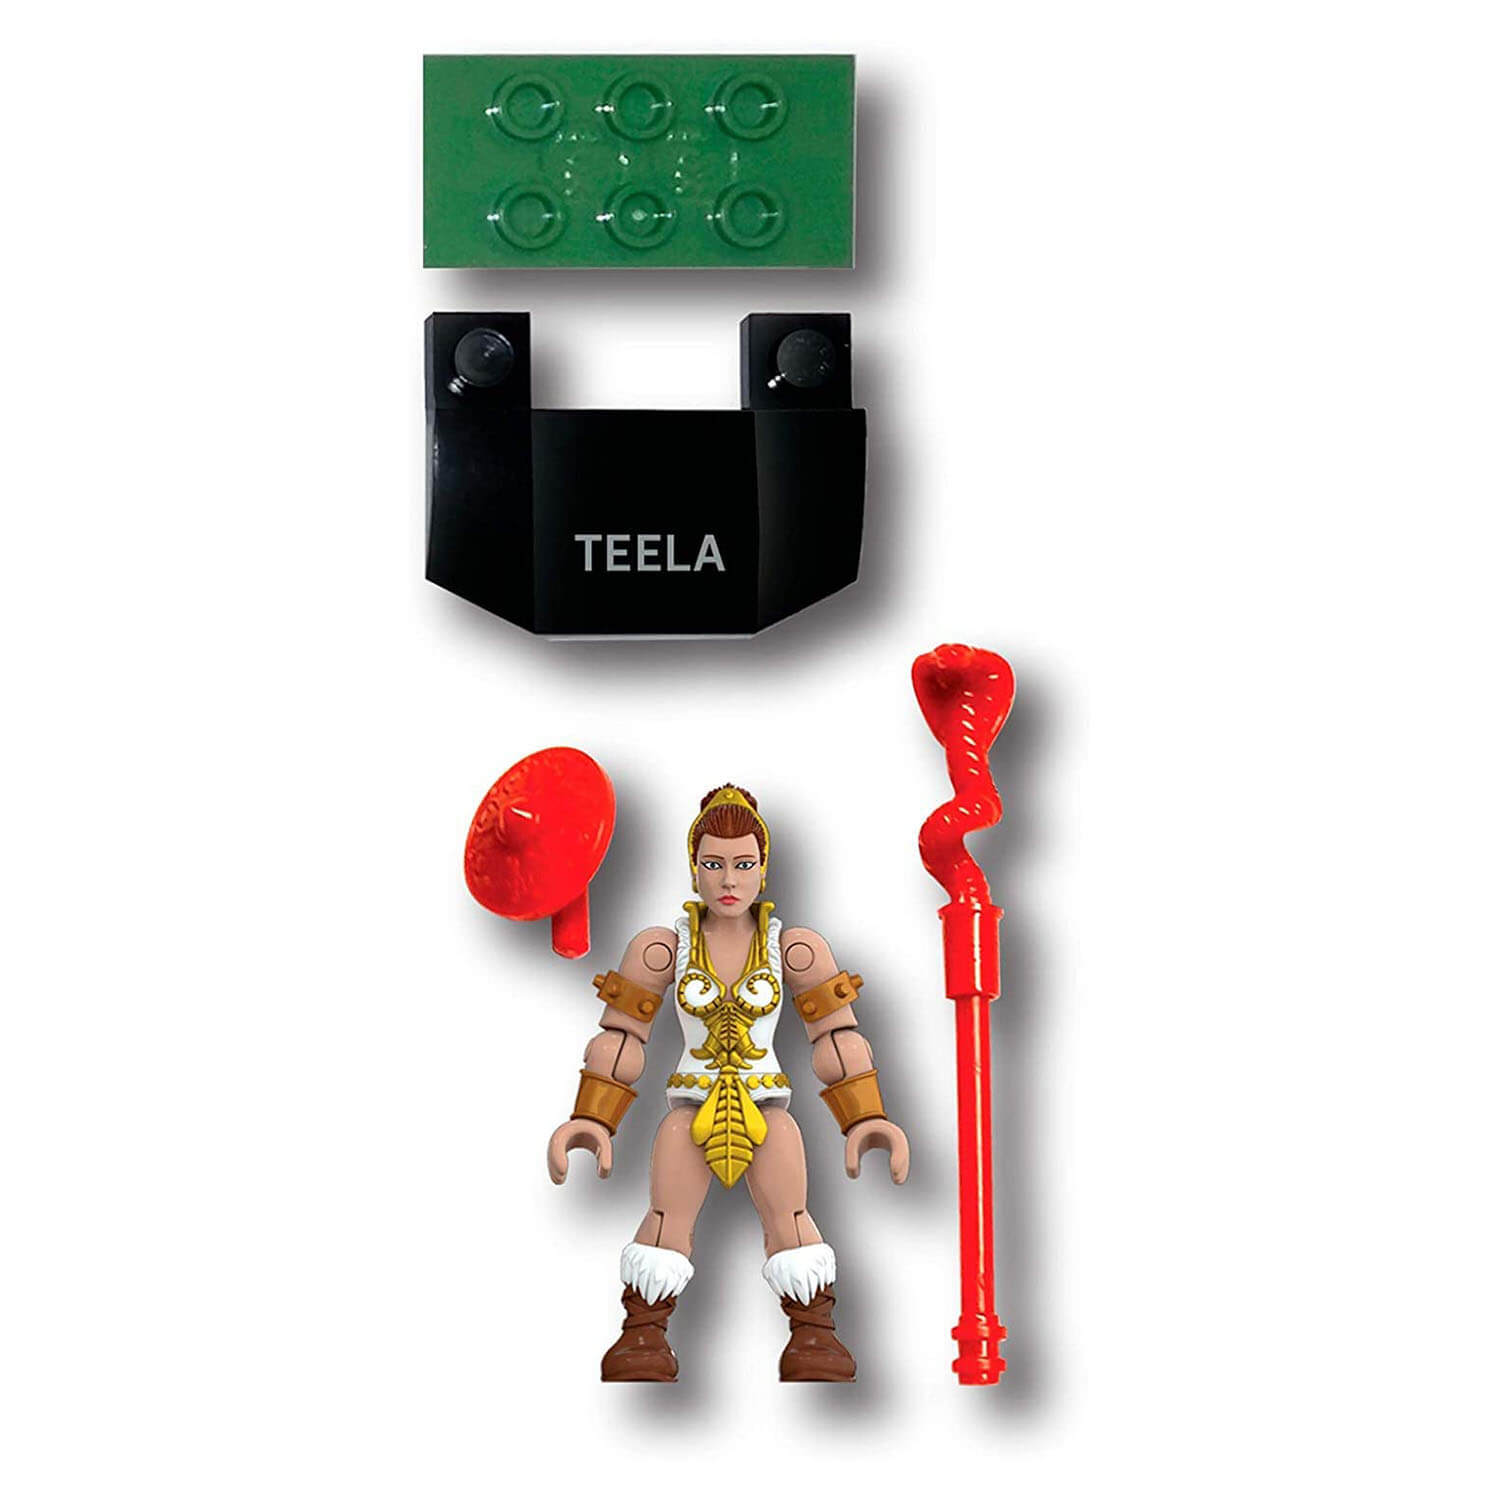 Front view of the teela figure.